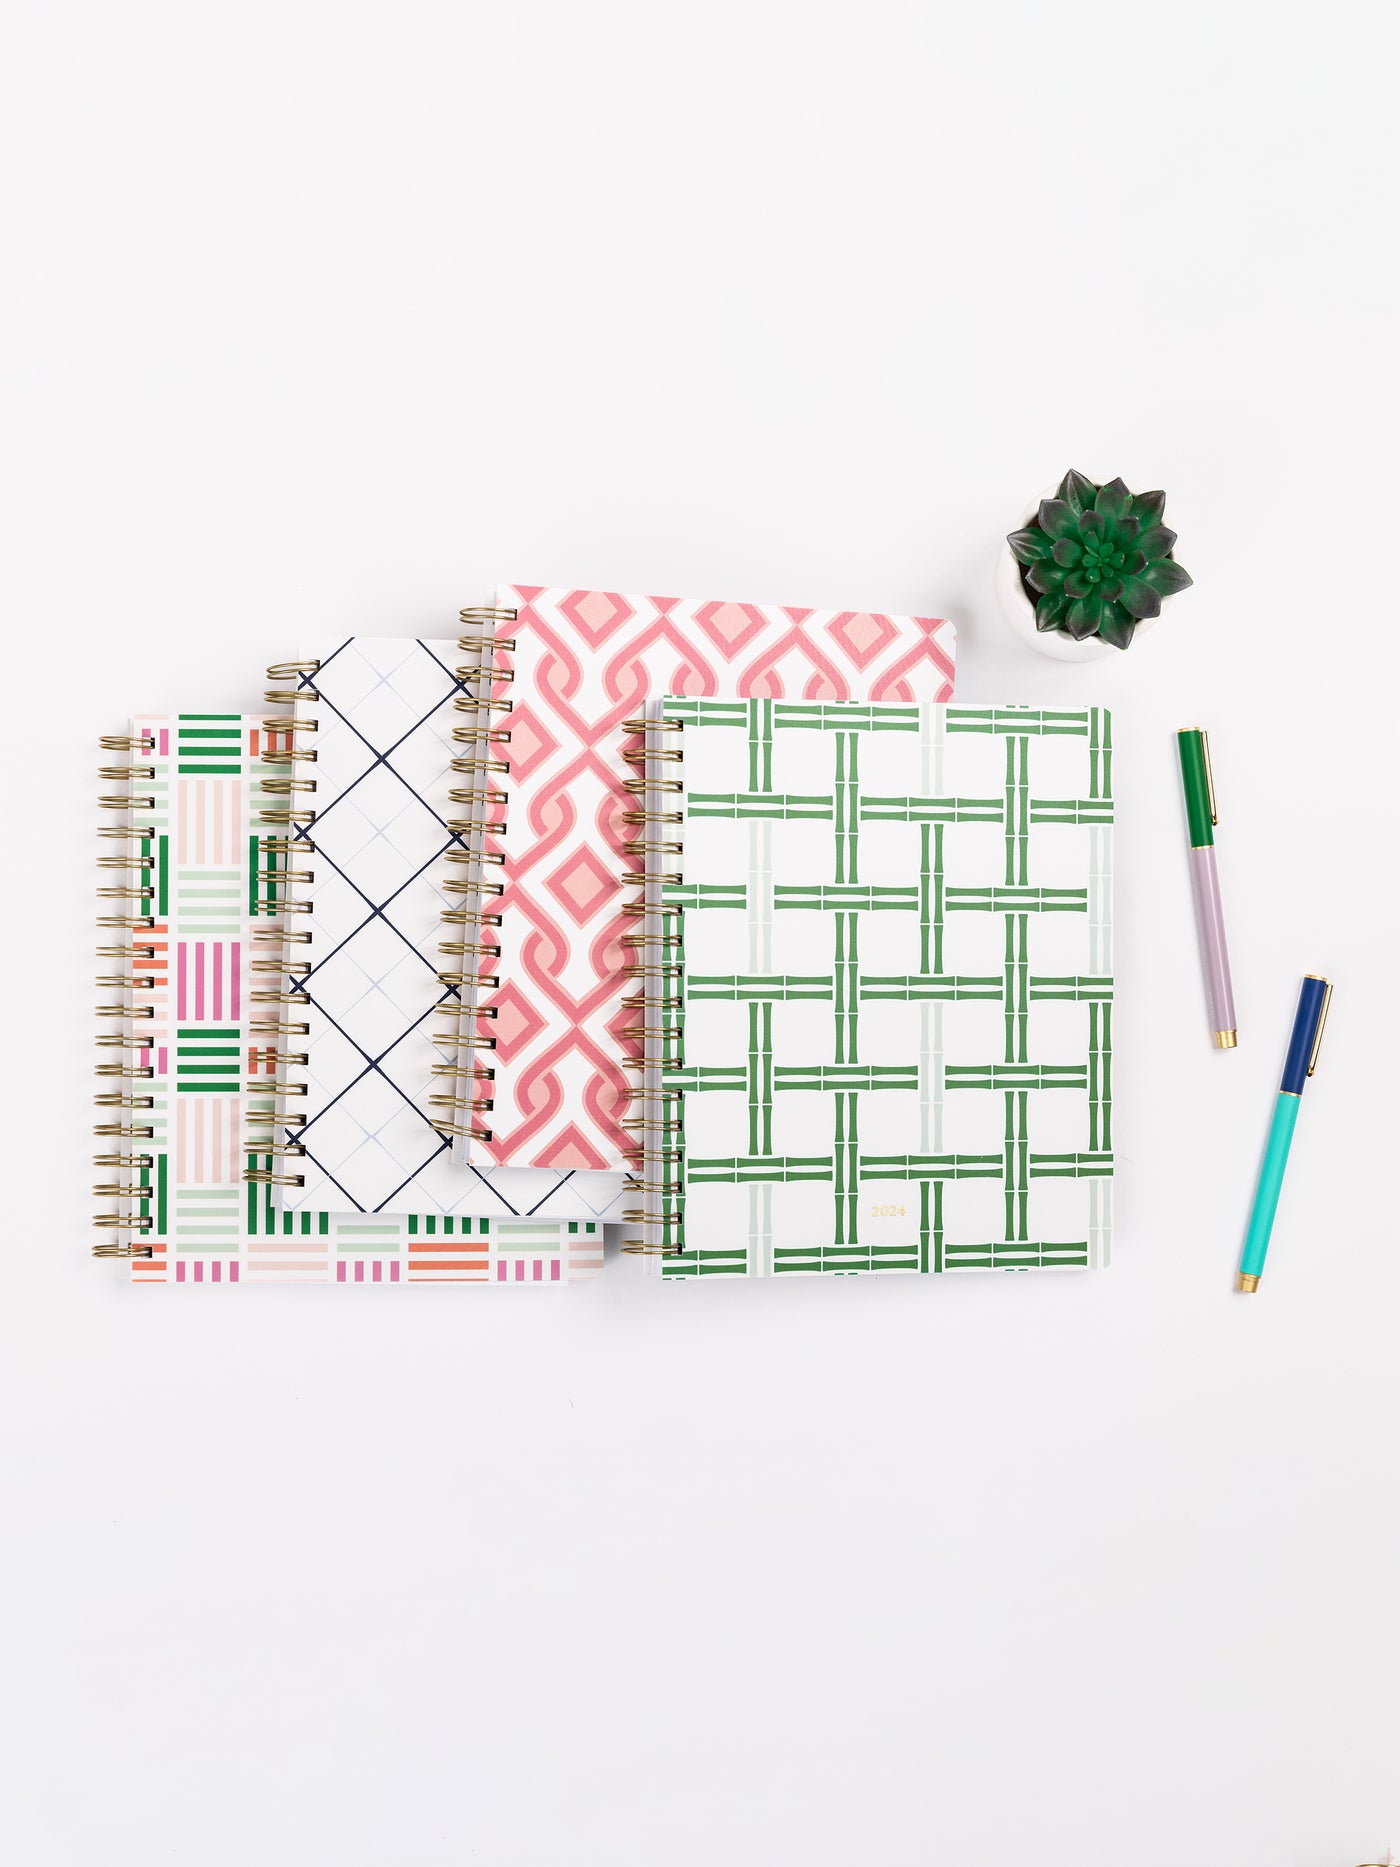 2024 Spiral Weekly Planner | Bamboo Breeze Green